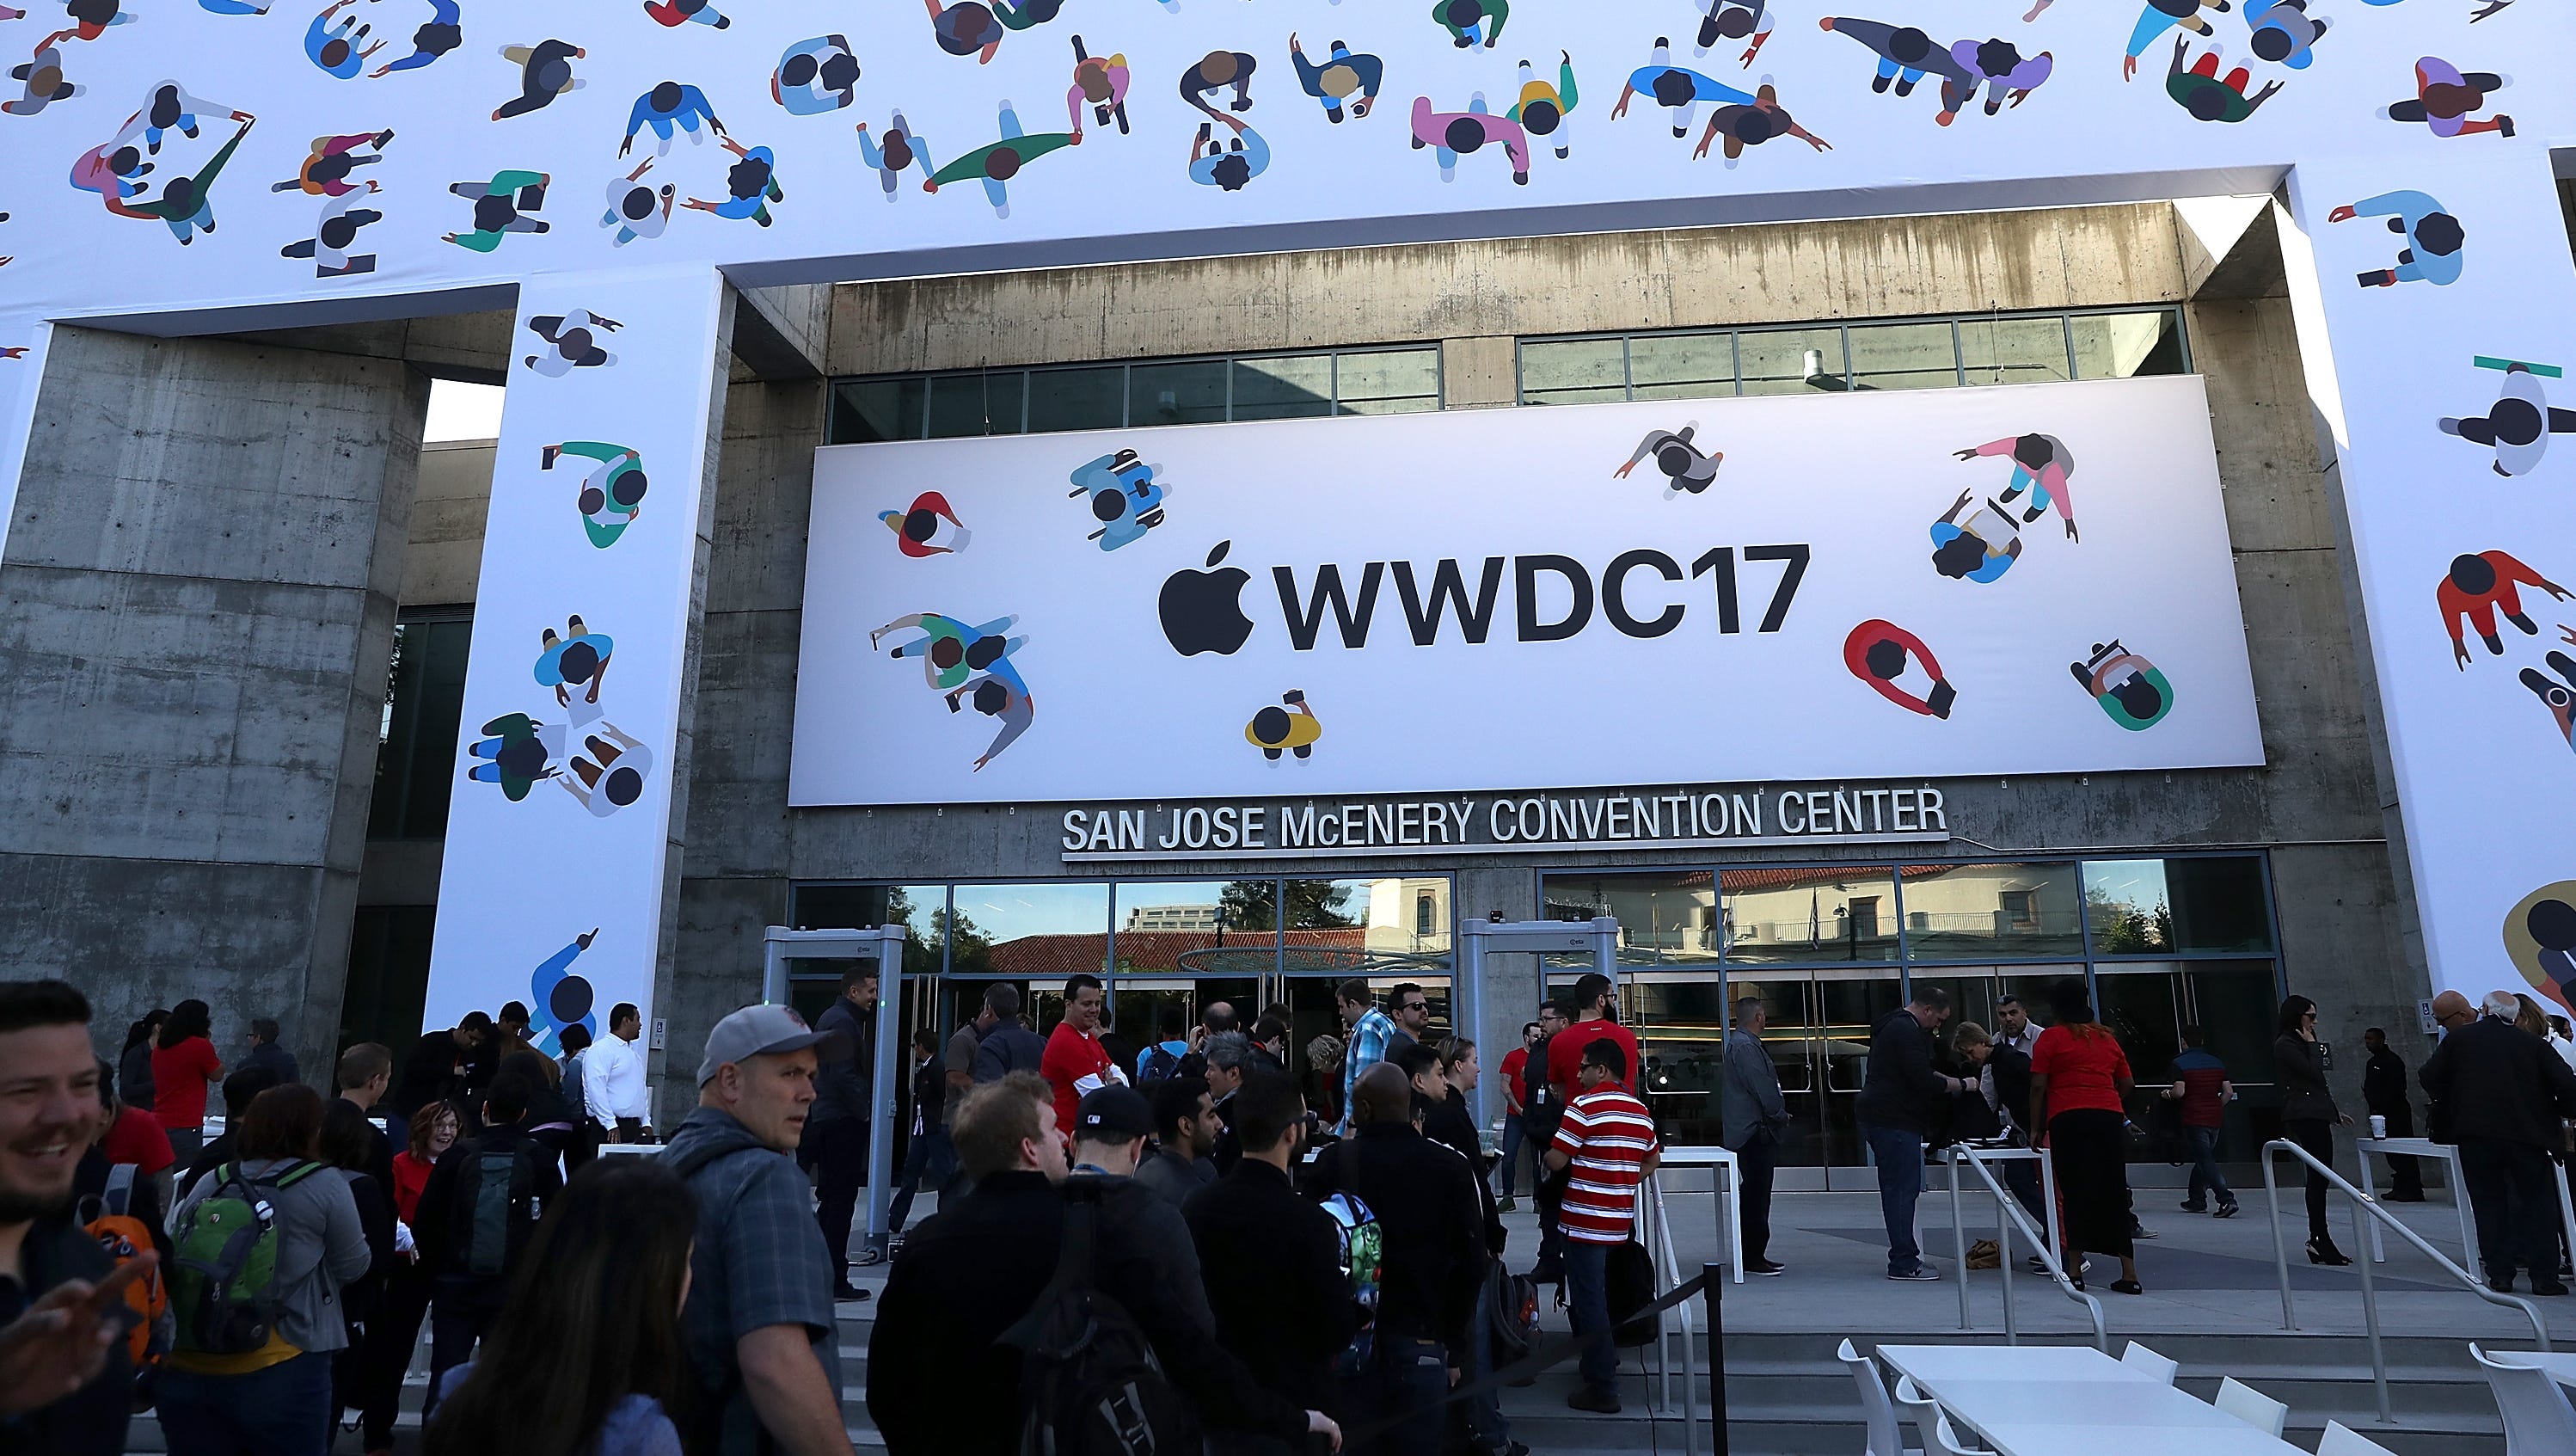 Attendees wait in line to enter the 2017 Apple Worldwide Developer Conference (WWDC) at the San Jose Convention Center on June 5, 2017 in San Jose, California. WWDC is primarily a software event which allows Apple to show external developers its plans for upcoming releases.

Apple appears poised to unveil a voice-activated, internet-connected speaker that would create a new digital pipeline into people's homes. Tapping Apple's Siri digital assistant, such a speaker is expected to serve as a butler as well as an outlet for listening to music. If the speculation pans out, the speaker would be Apple's first new product since its smartwatch in 2015.